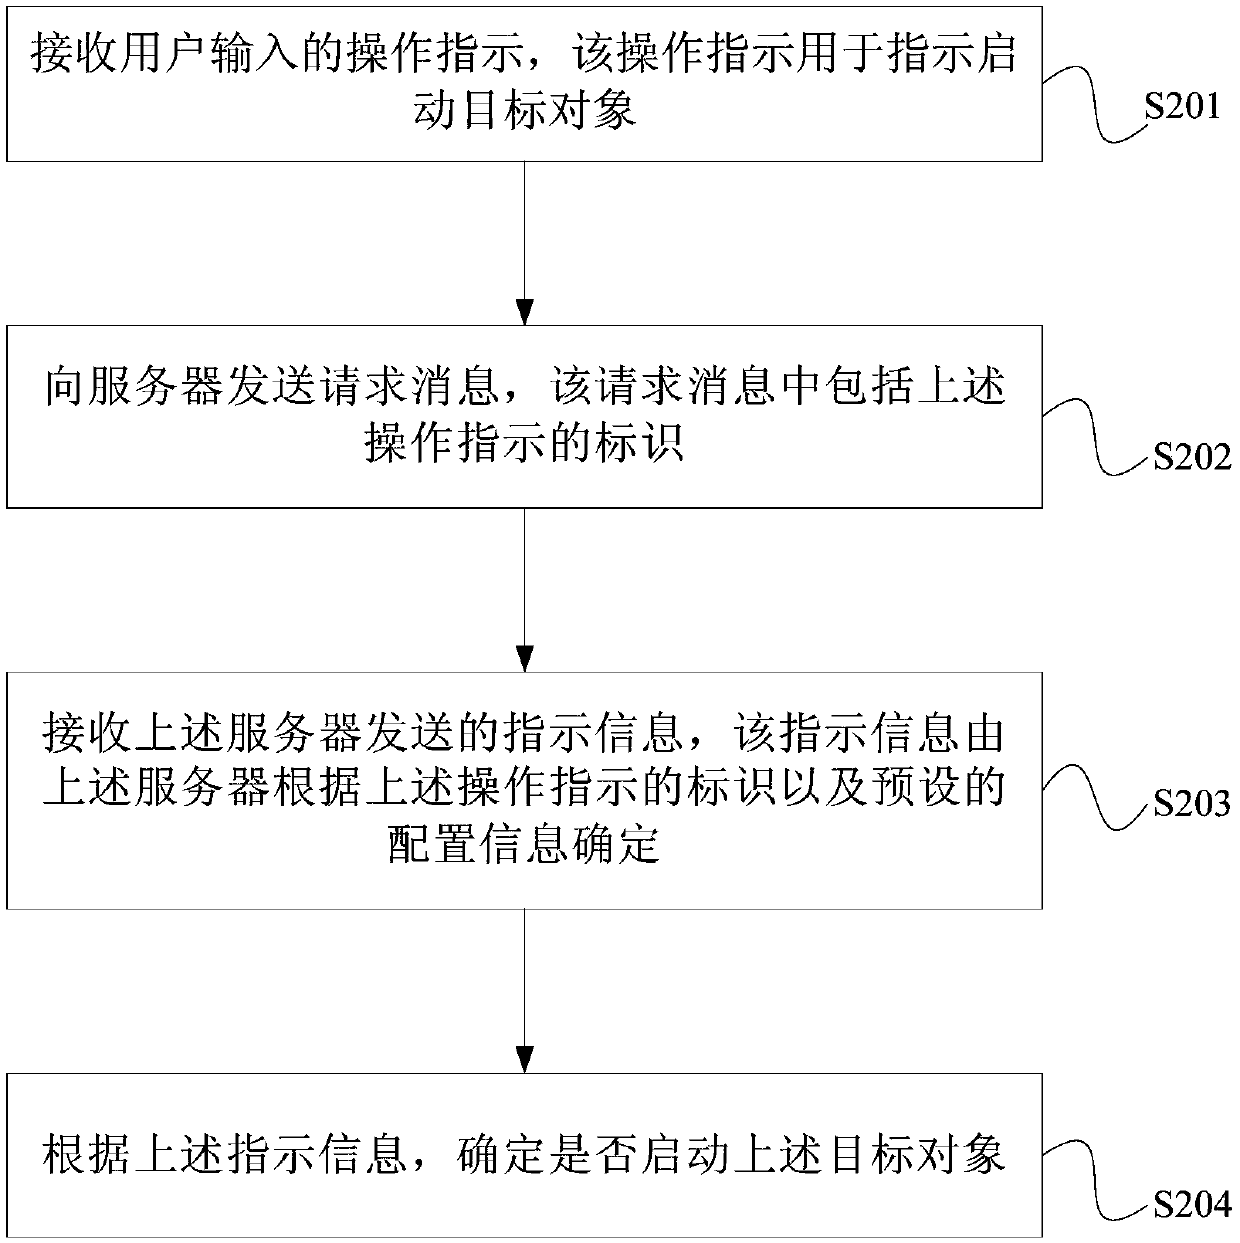 Application program control method and device, electronic equipment and readable storage medium